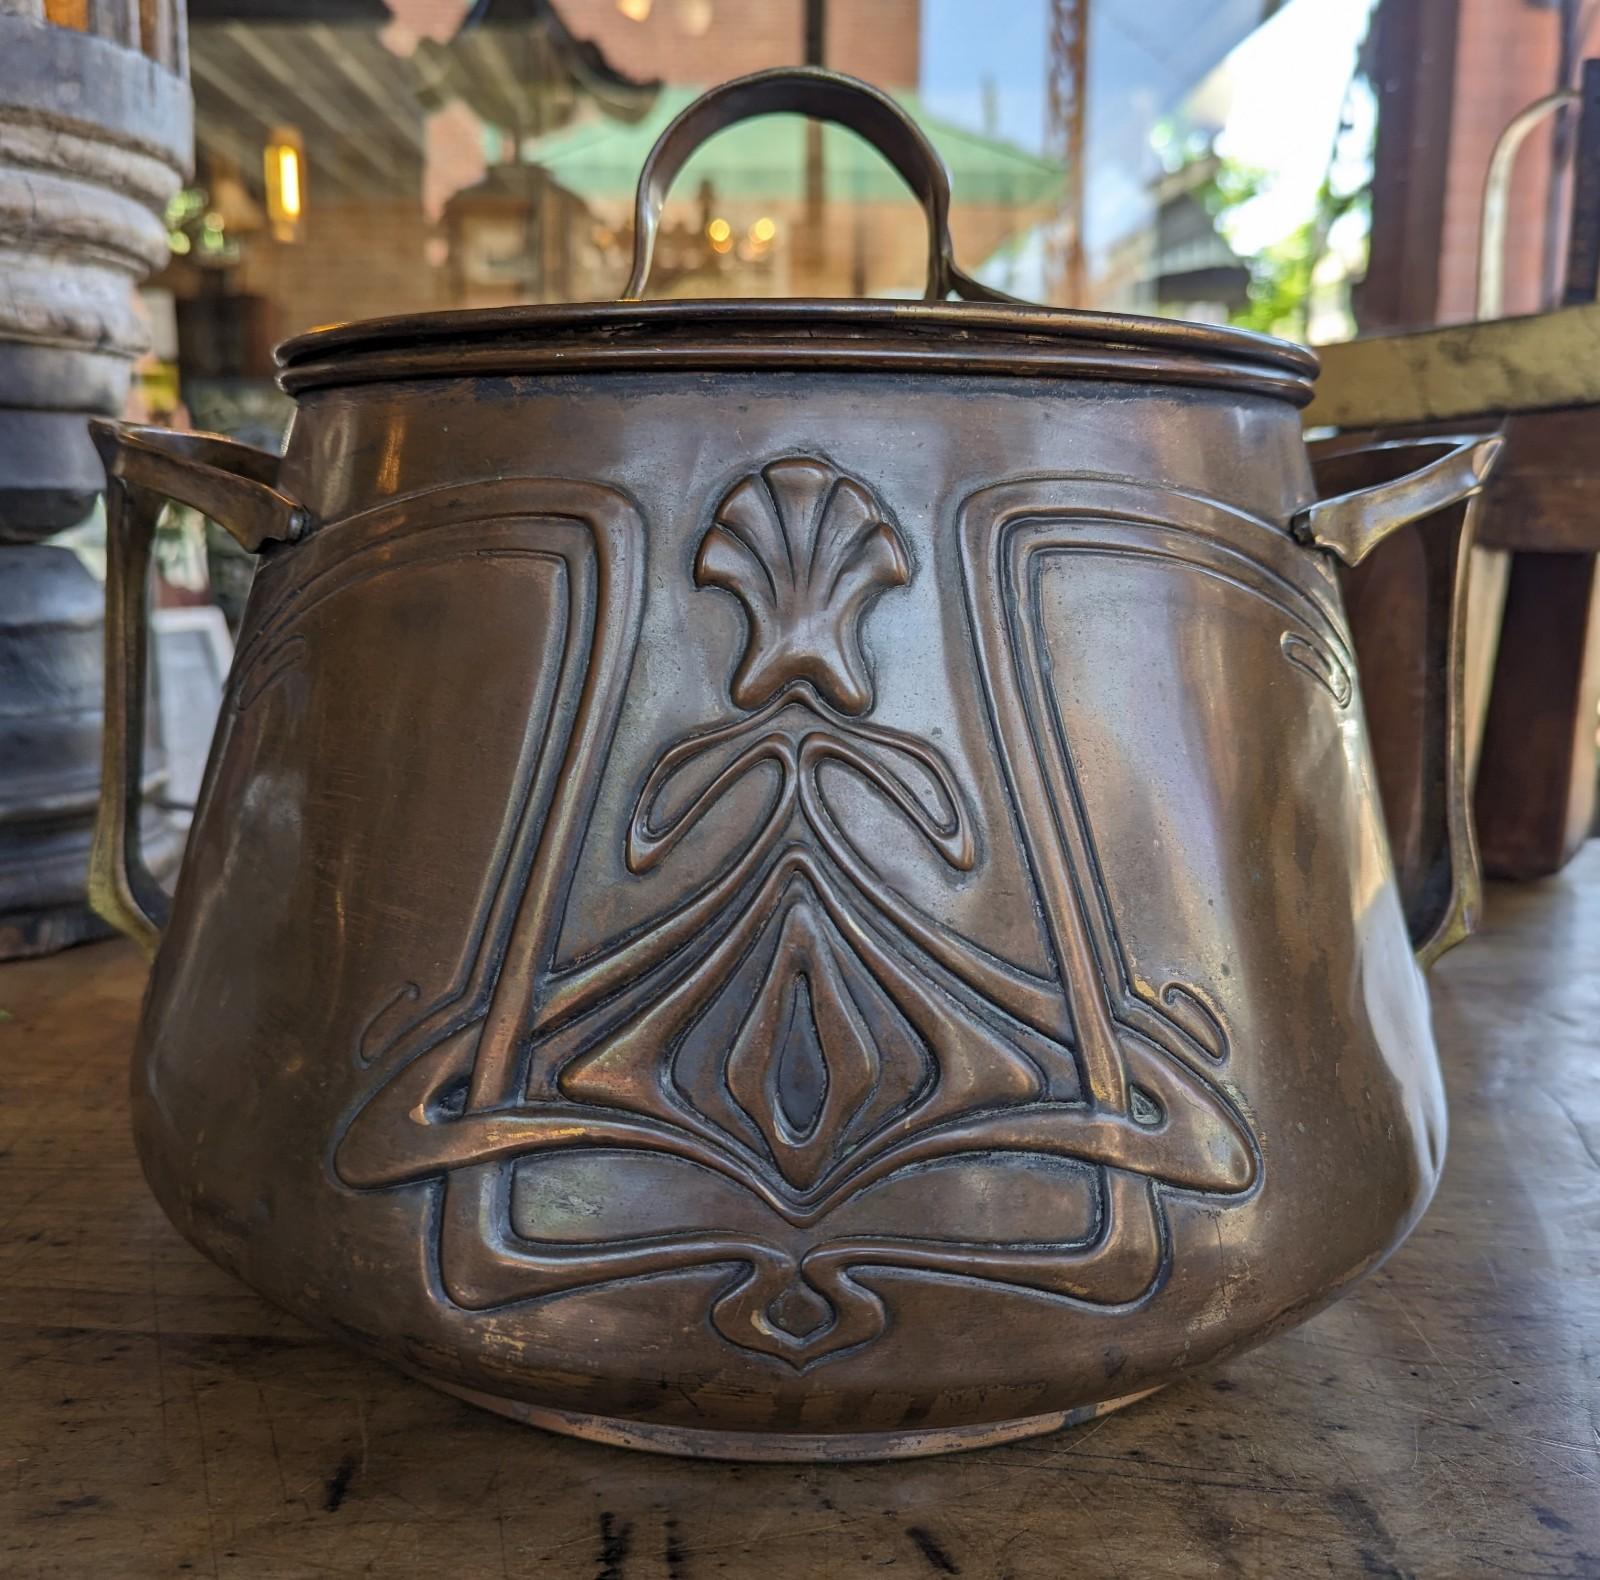 Elegant antique hand made and hand hammered Art Nouveau piece, this lidded copper pot has both style and function. Created in the early 1900's when the Arts & Crafts movement was at its peak and flourishing. We believe the interior is tin lined but